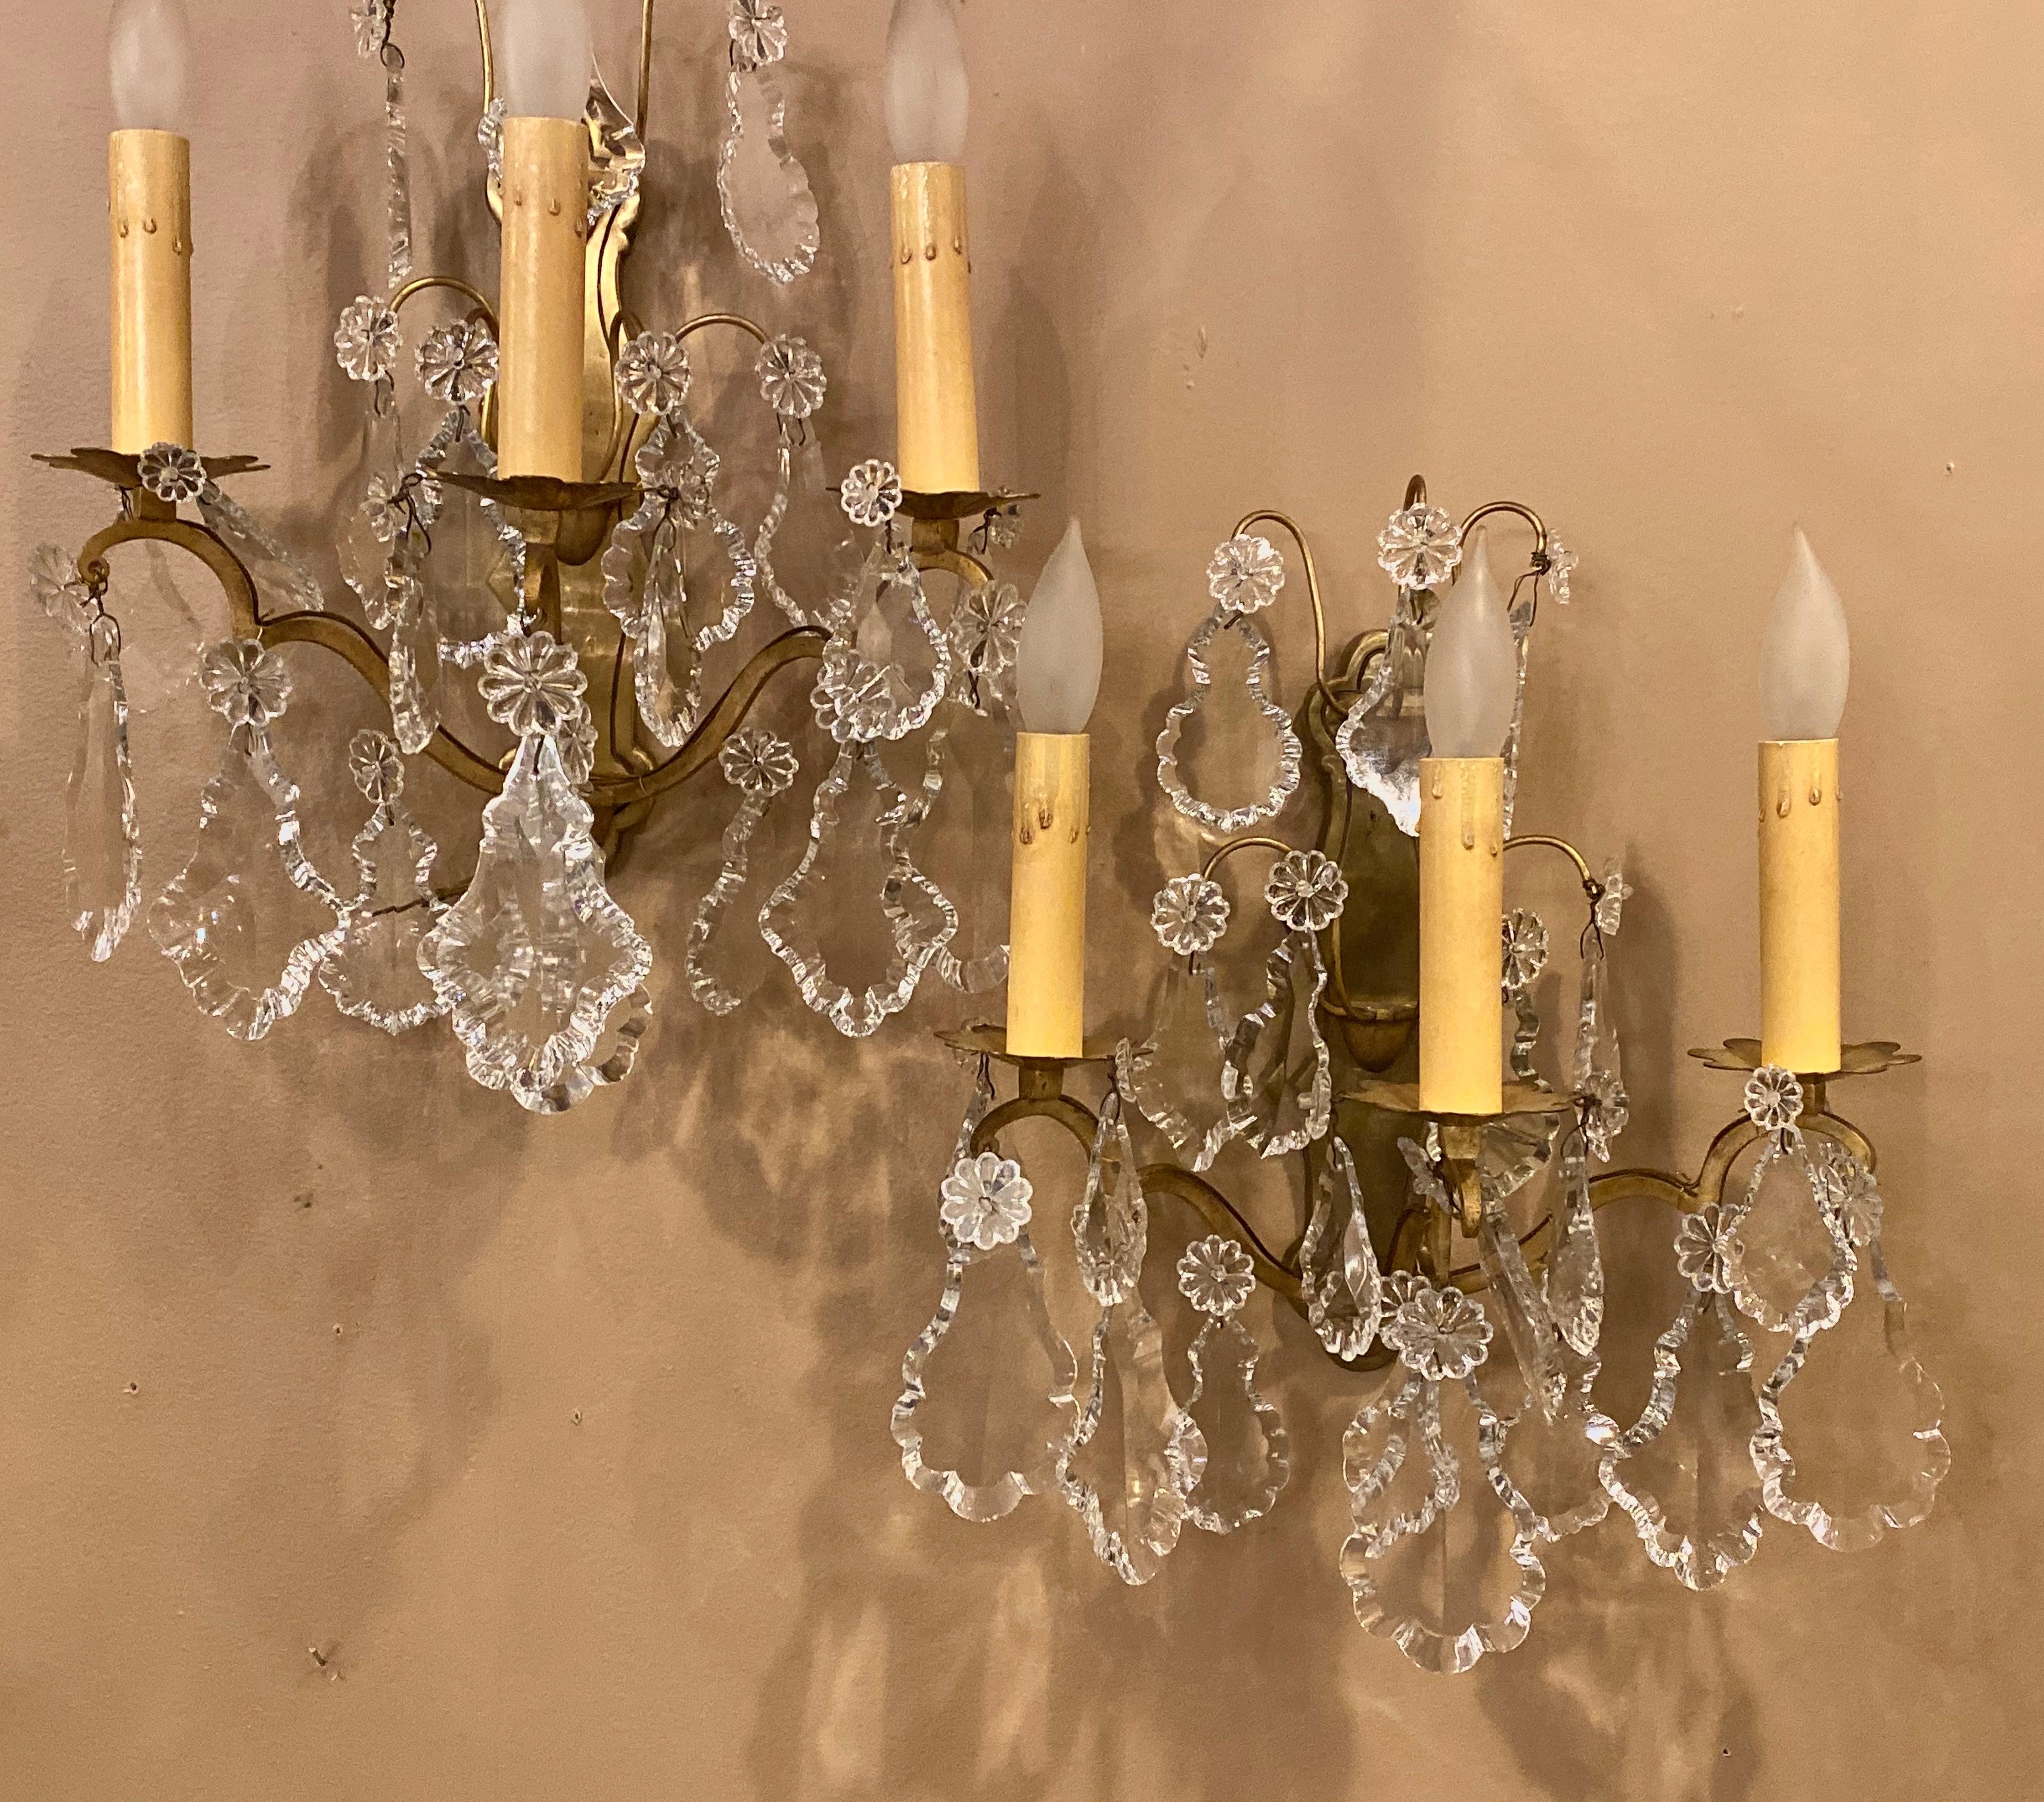 Pair gilt bronze and crystal three-light wall sconces French early 20th century. Each with a solid bronze back plate and large impressive nicely cut crystals. These can be shipped via UPS> 
1SX.